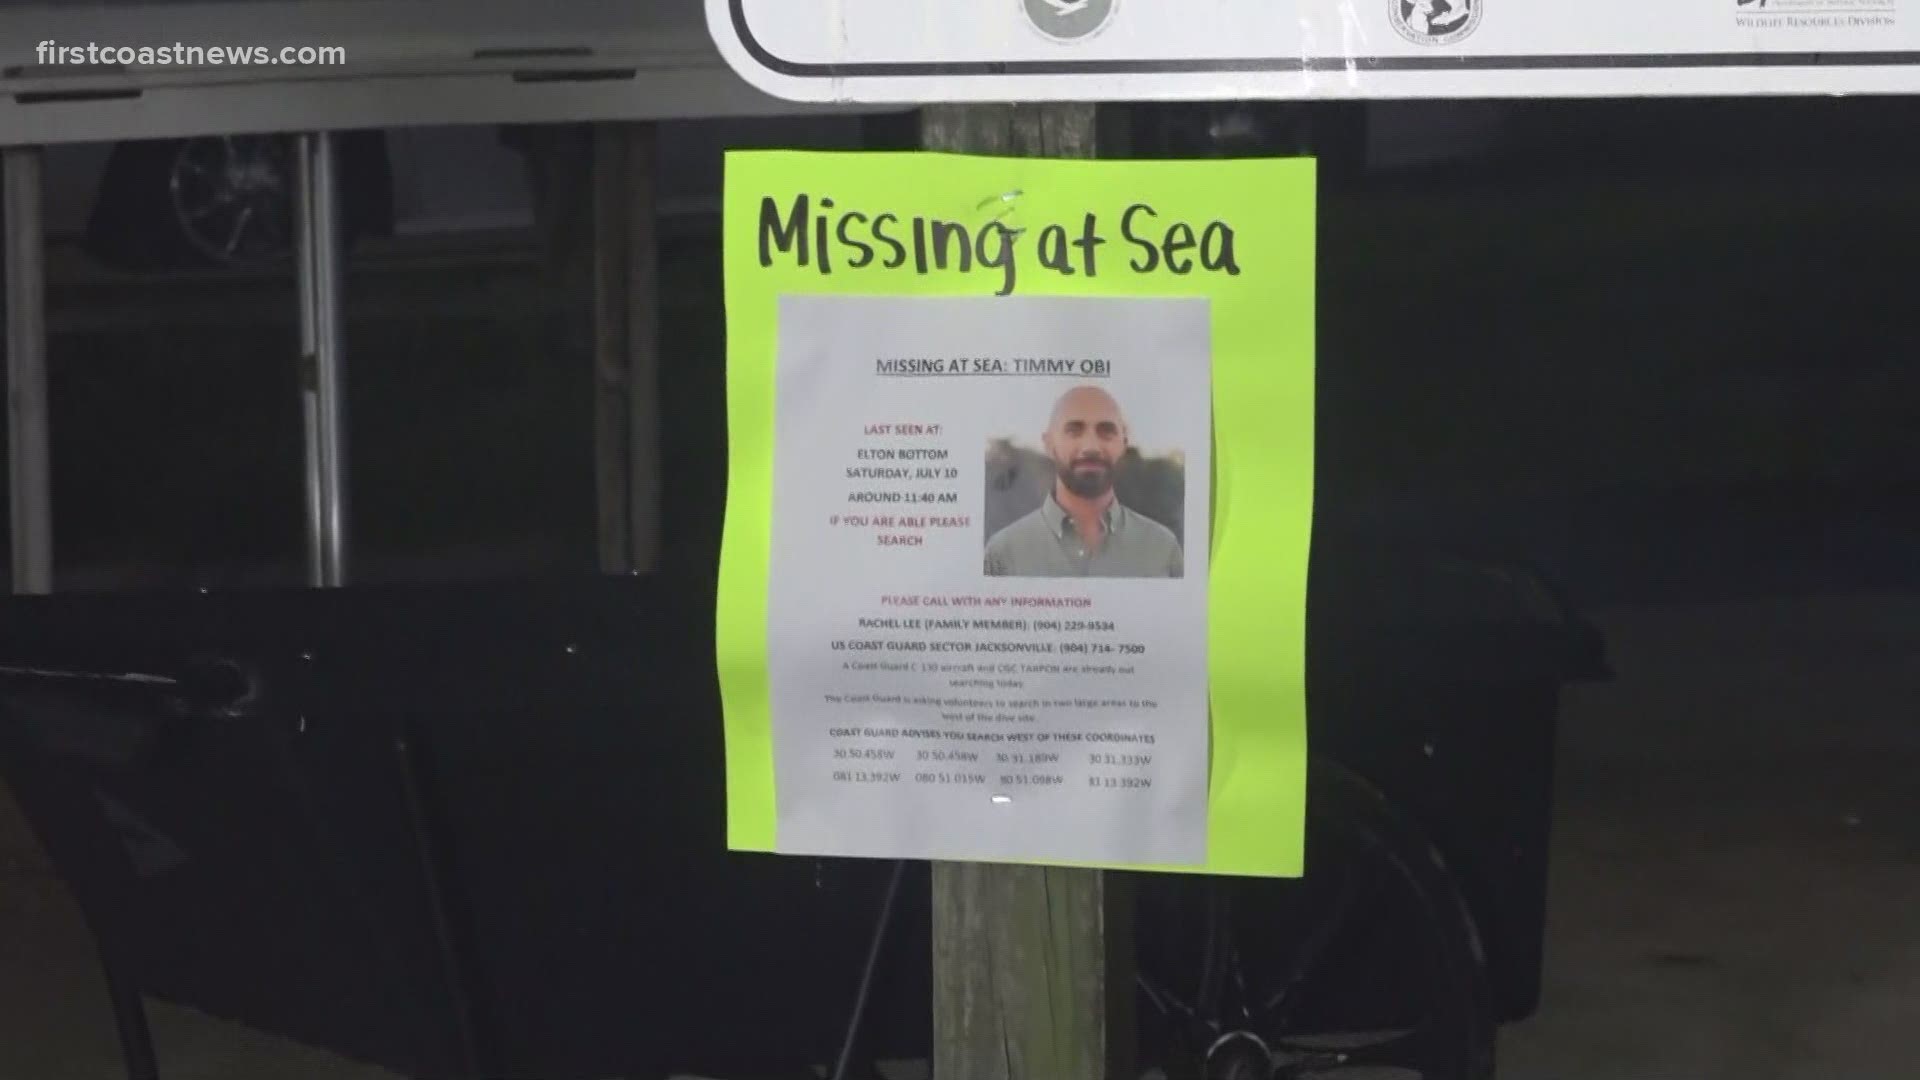 In addition to a Coast Guard vessel and a C130 airplane, there are about a dozen private boats helping in the search for Timmy Obi.